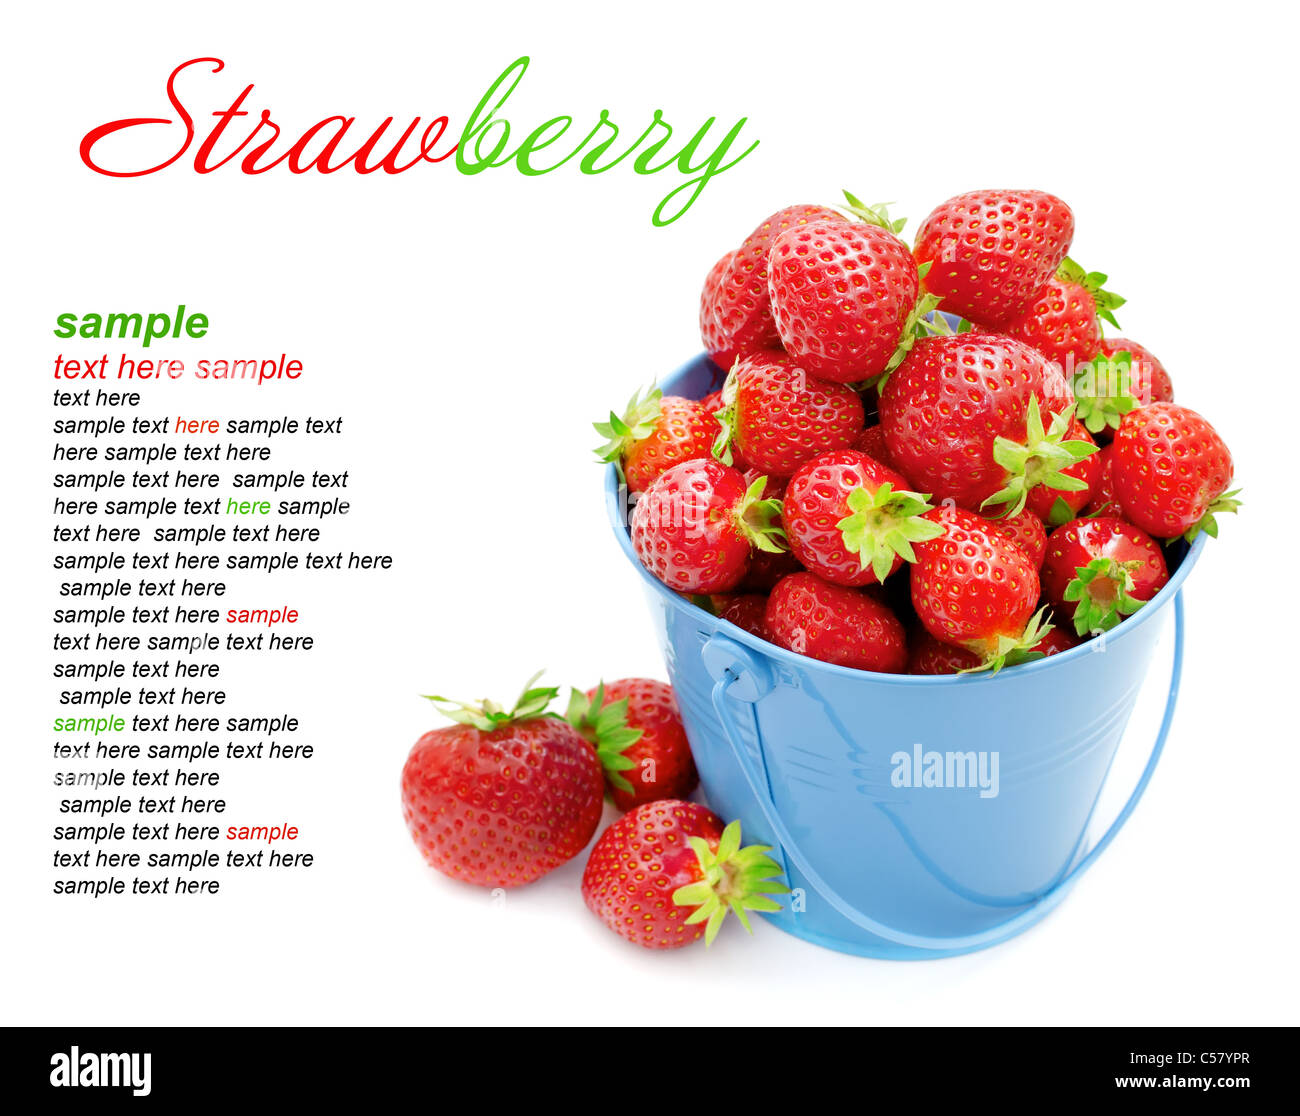 Strawberries in a bucket on a white background. Stock Photo